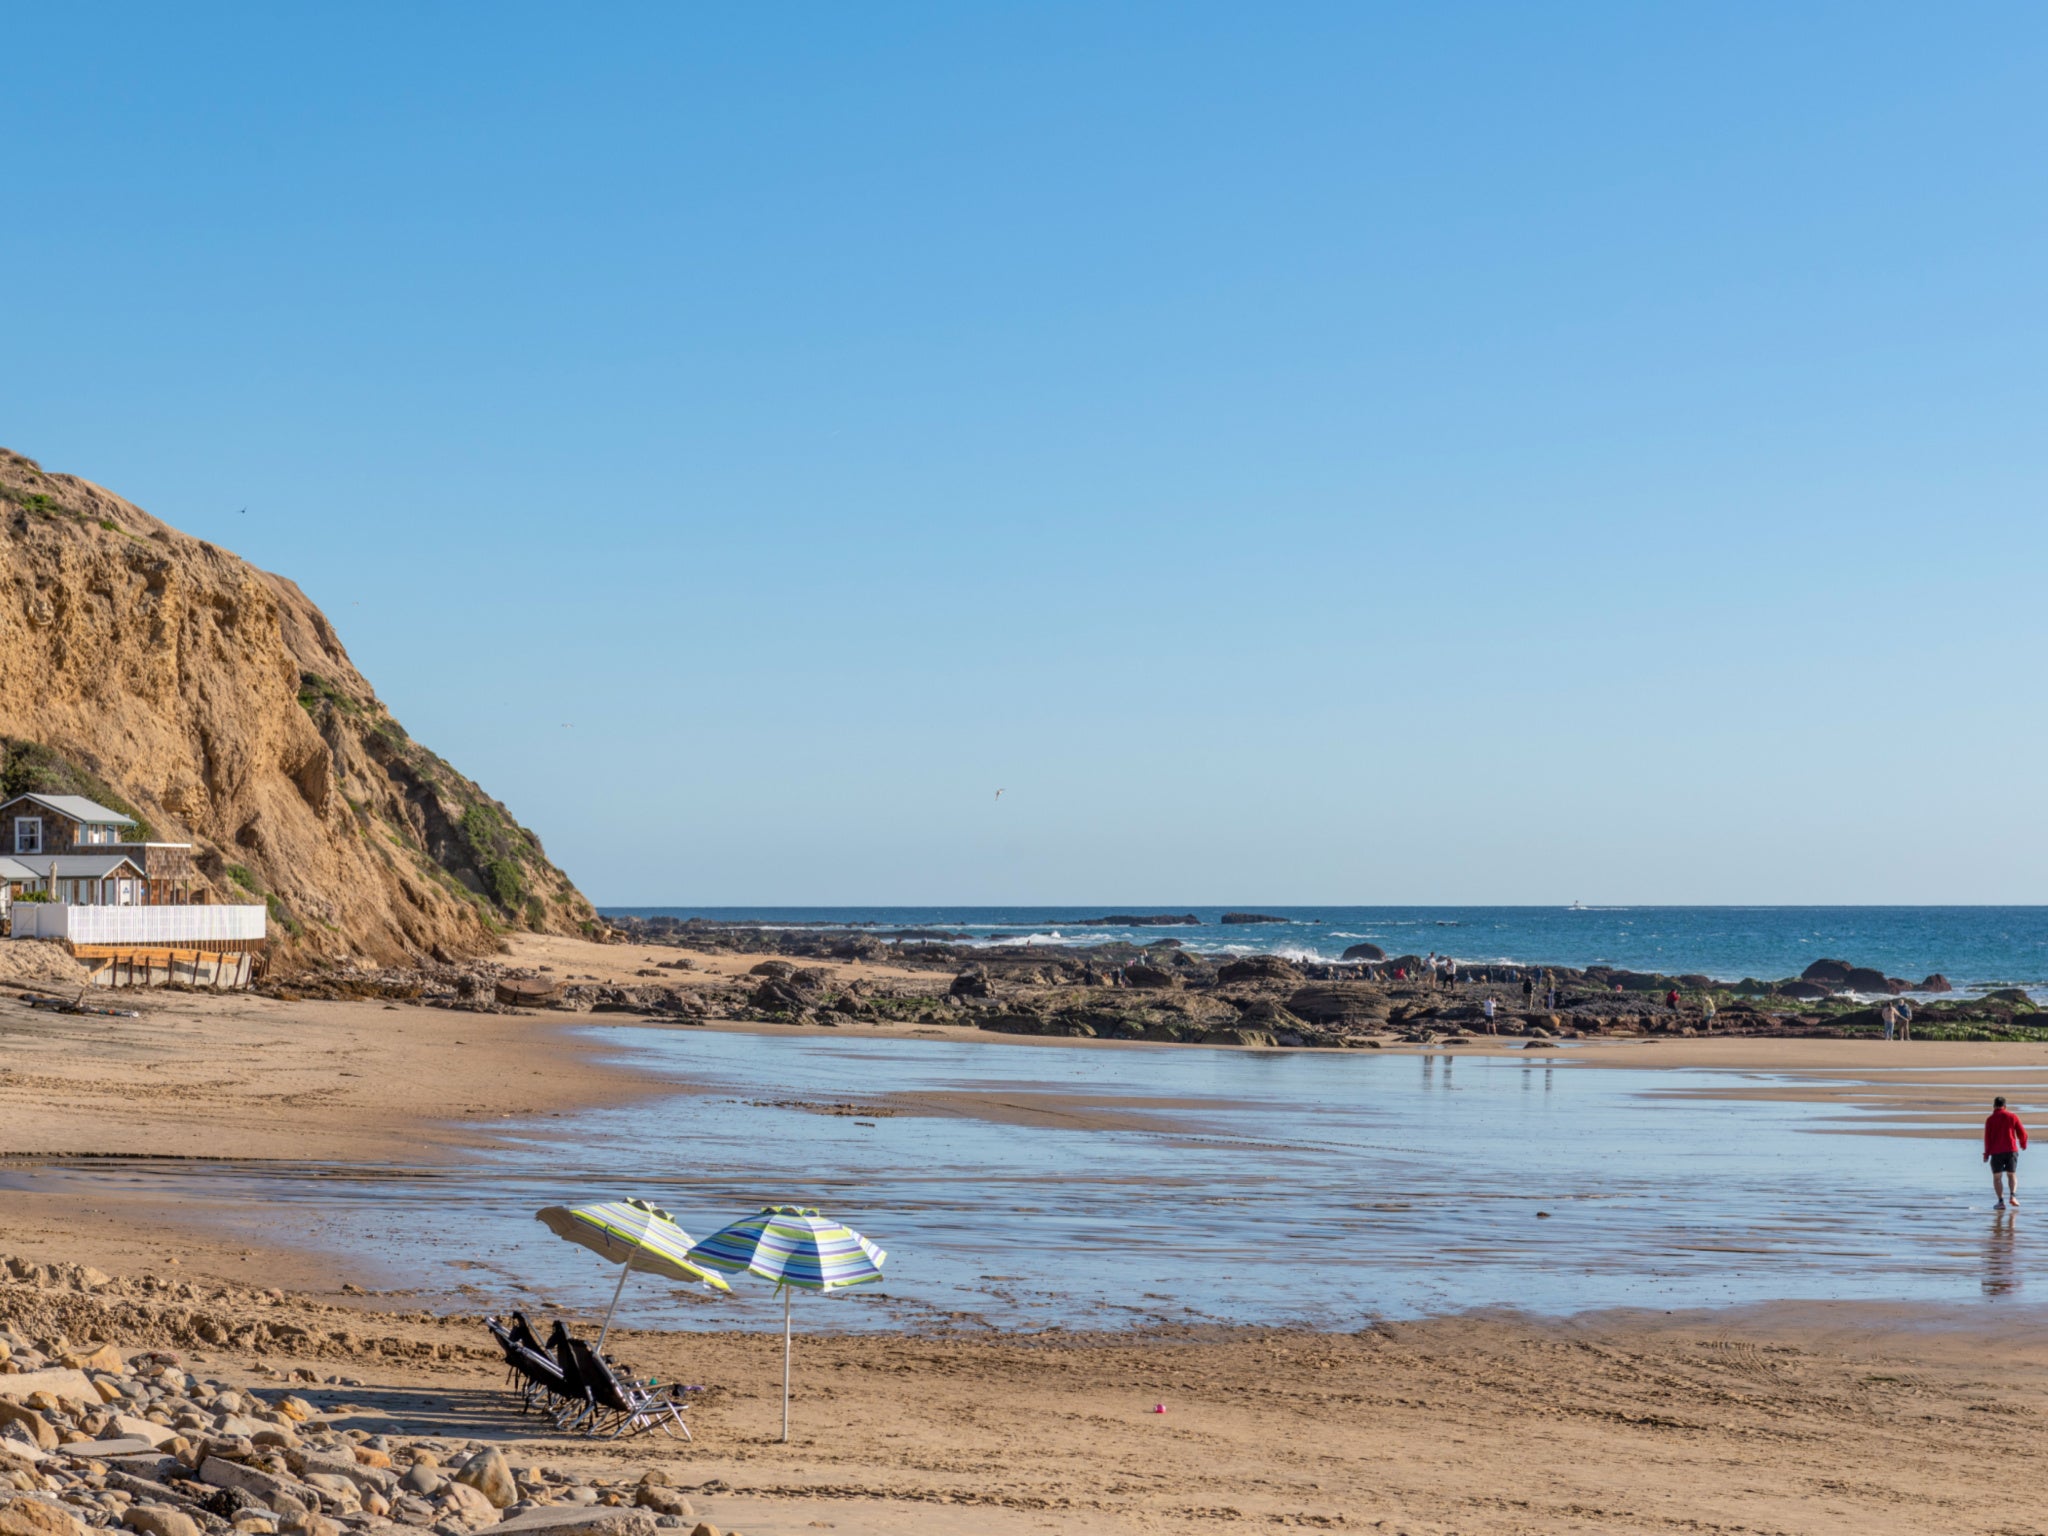 Bette Midler fans may recognise Crystal Cove from the movie Beaches